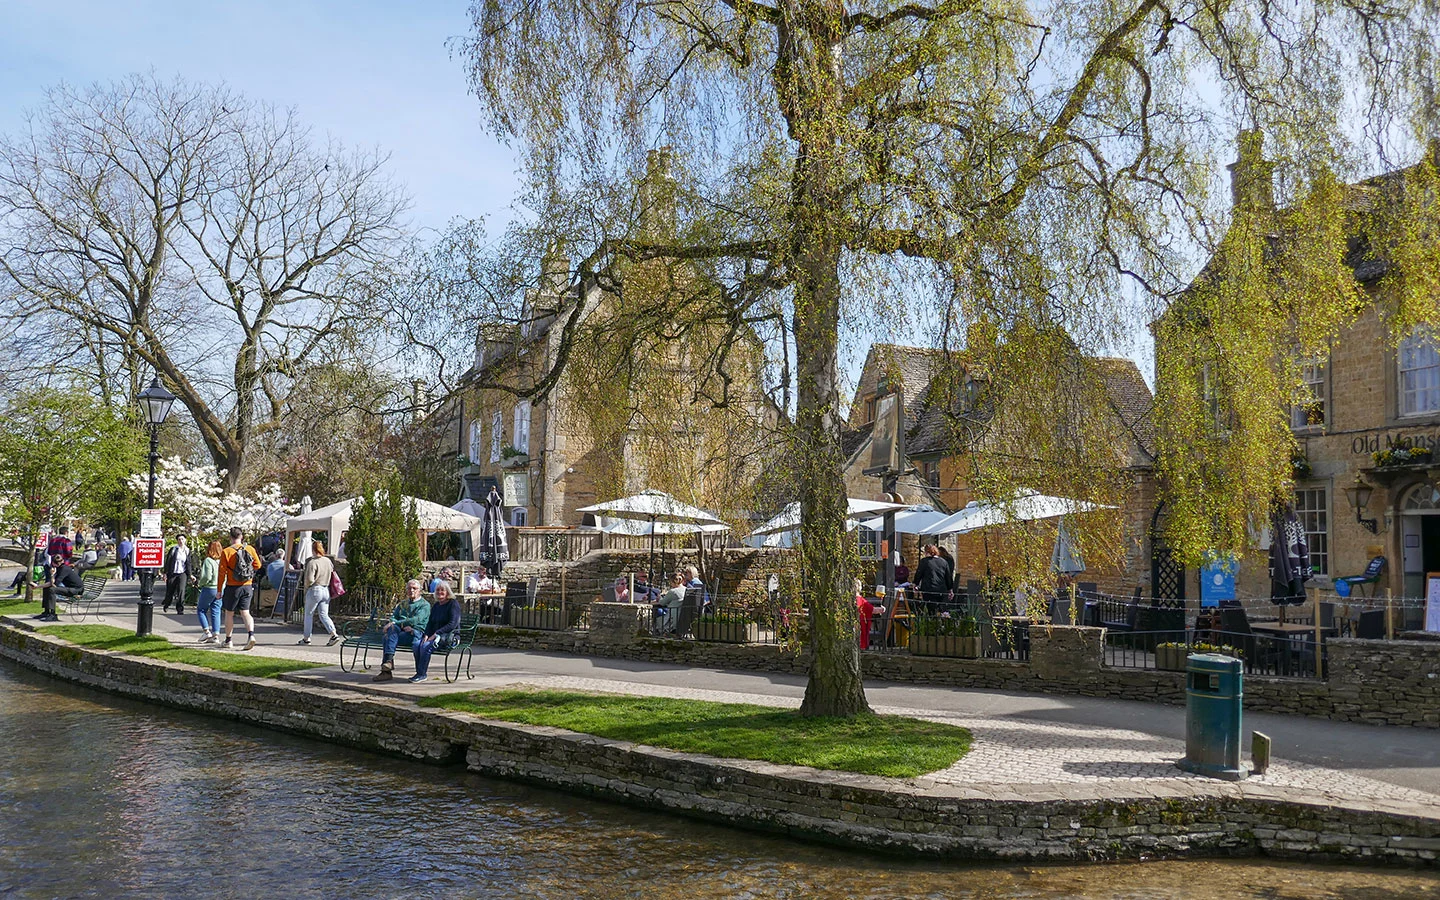 Restaurants along the River Windrush in Bourton-on-the-Water